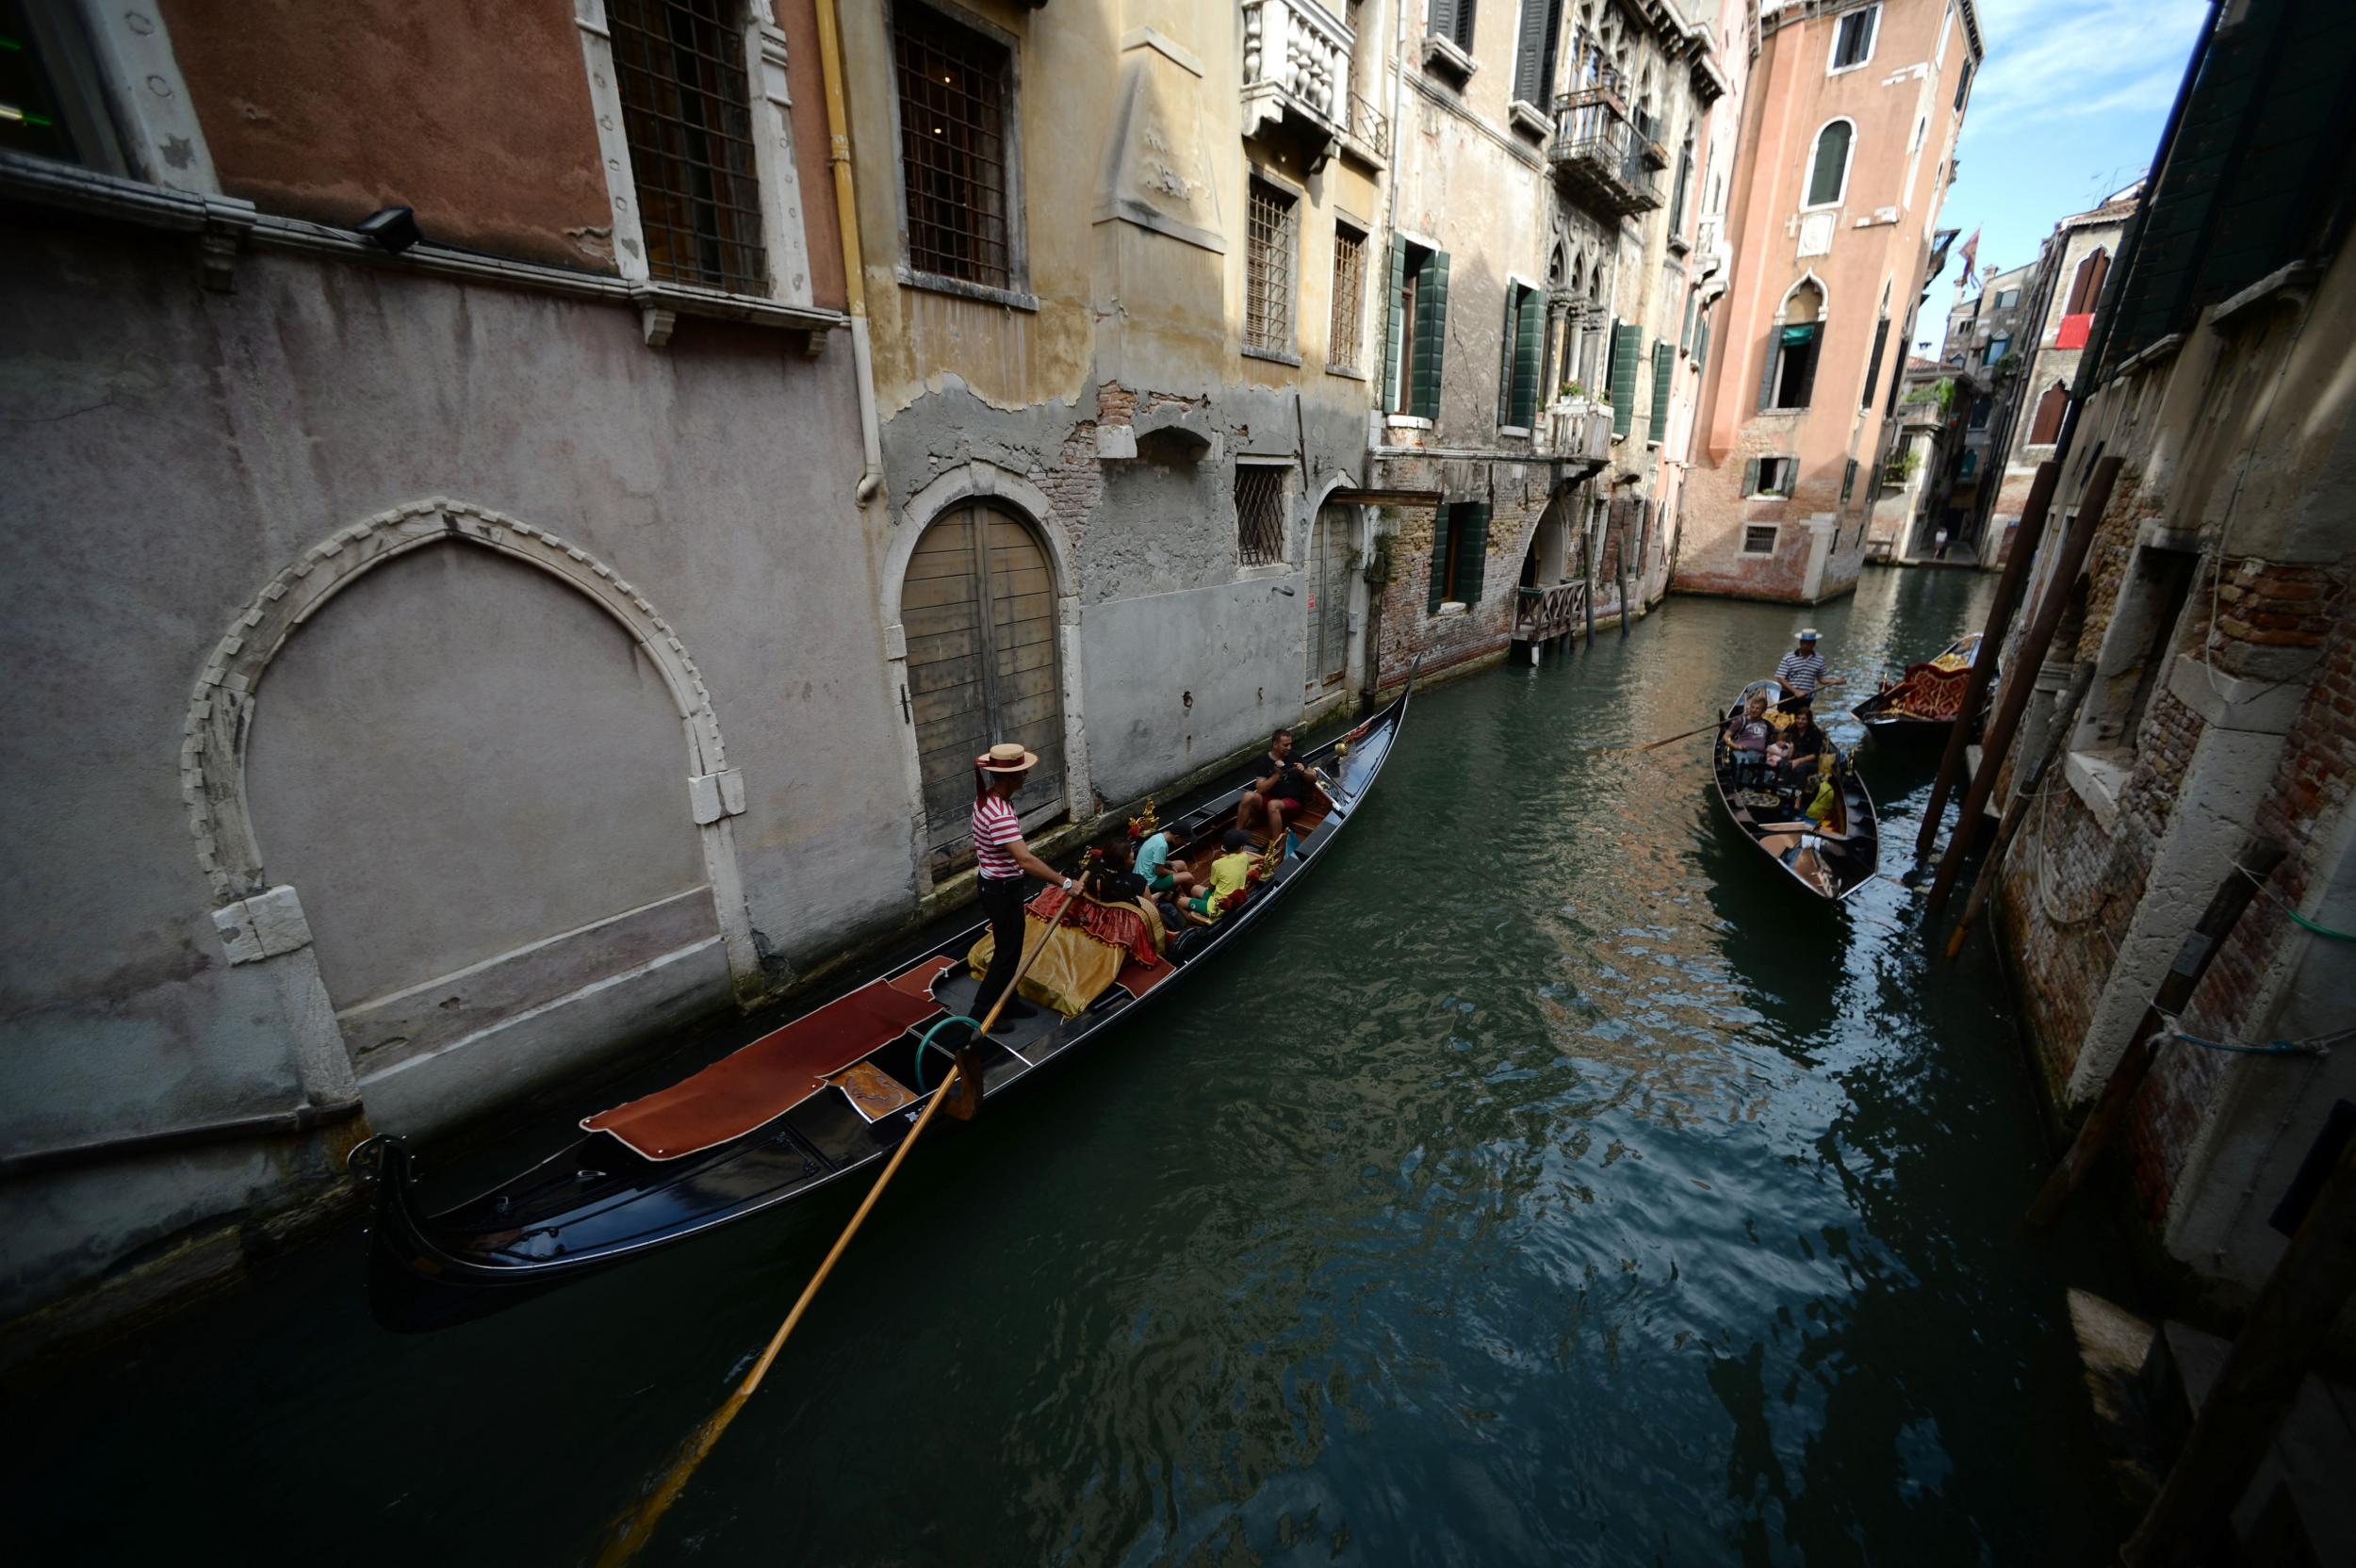 Venice is not very accessible for wheelchair users